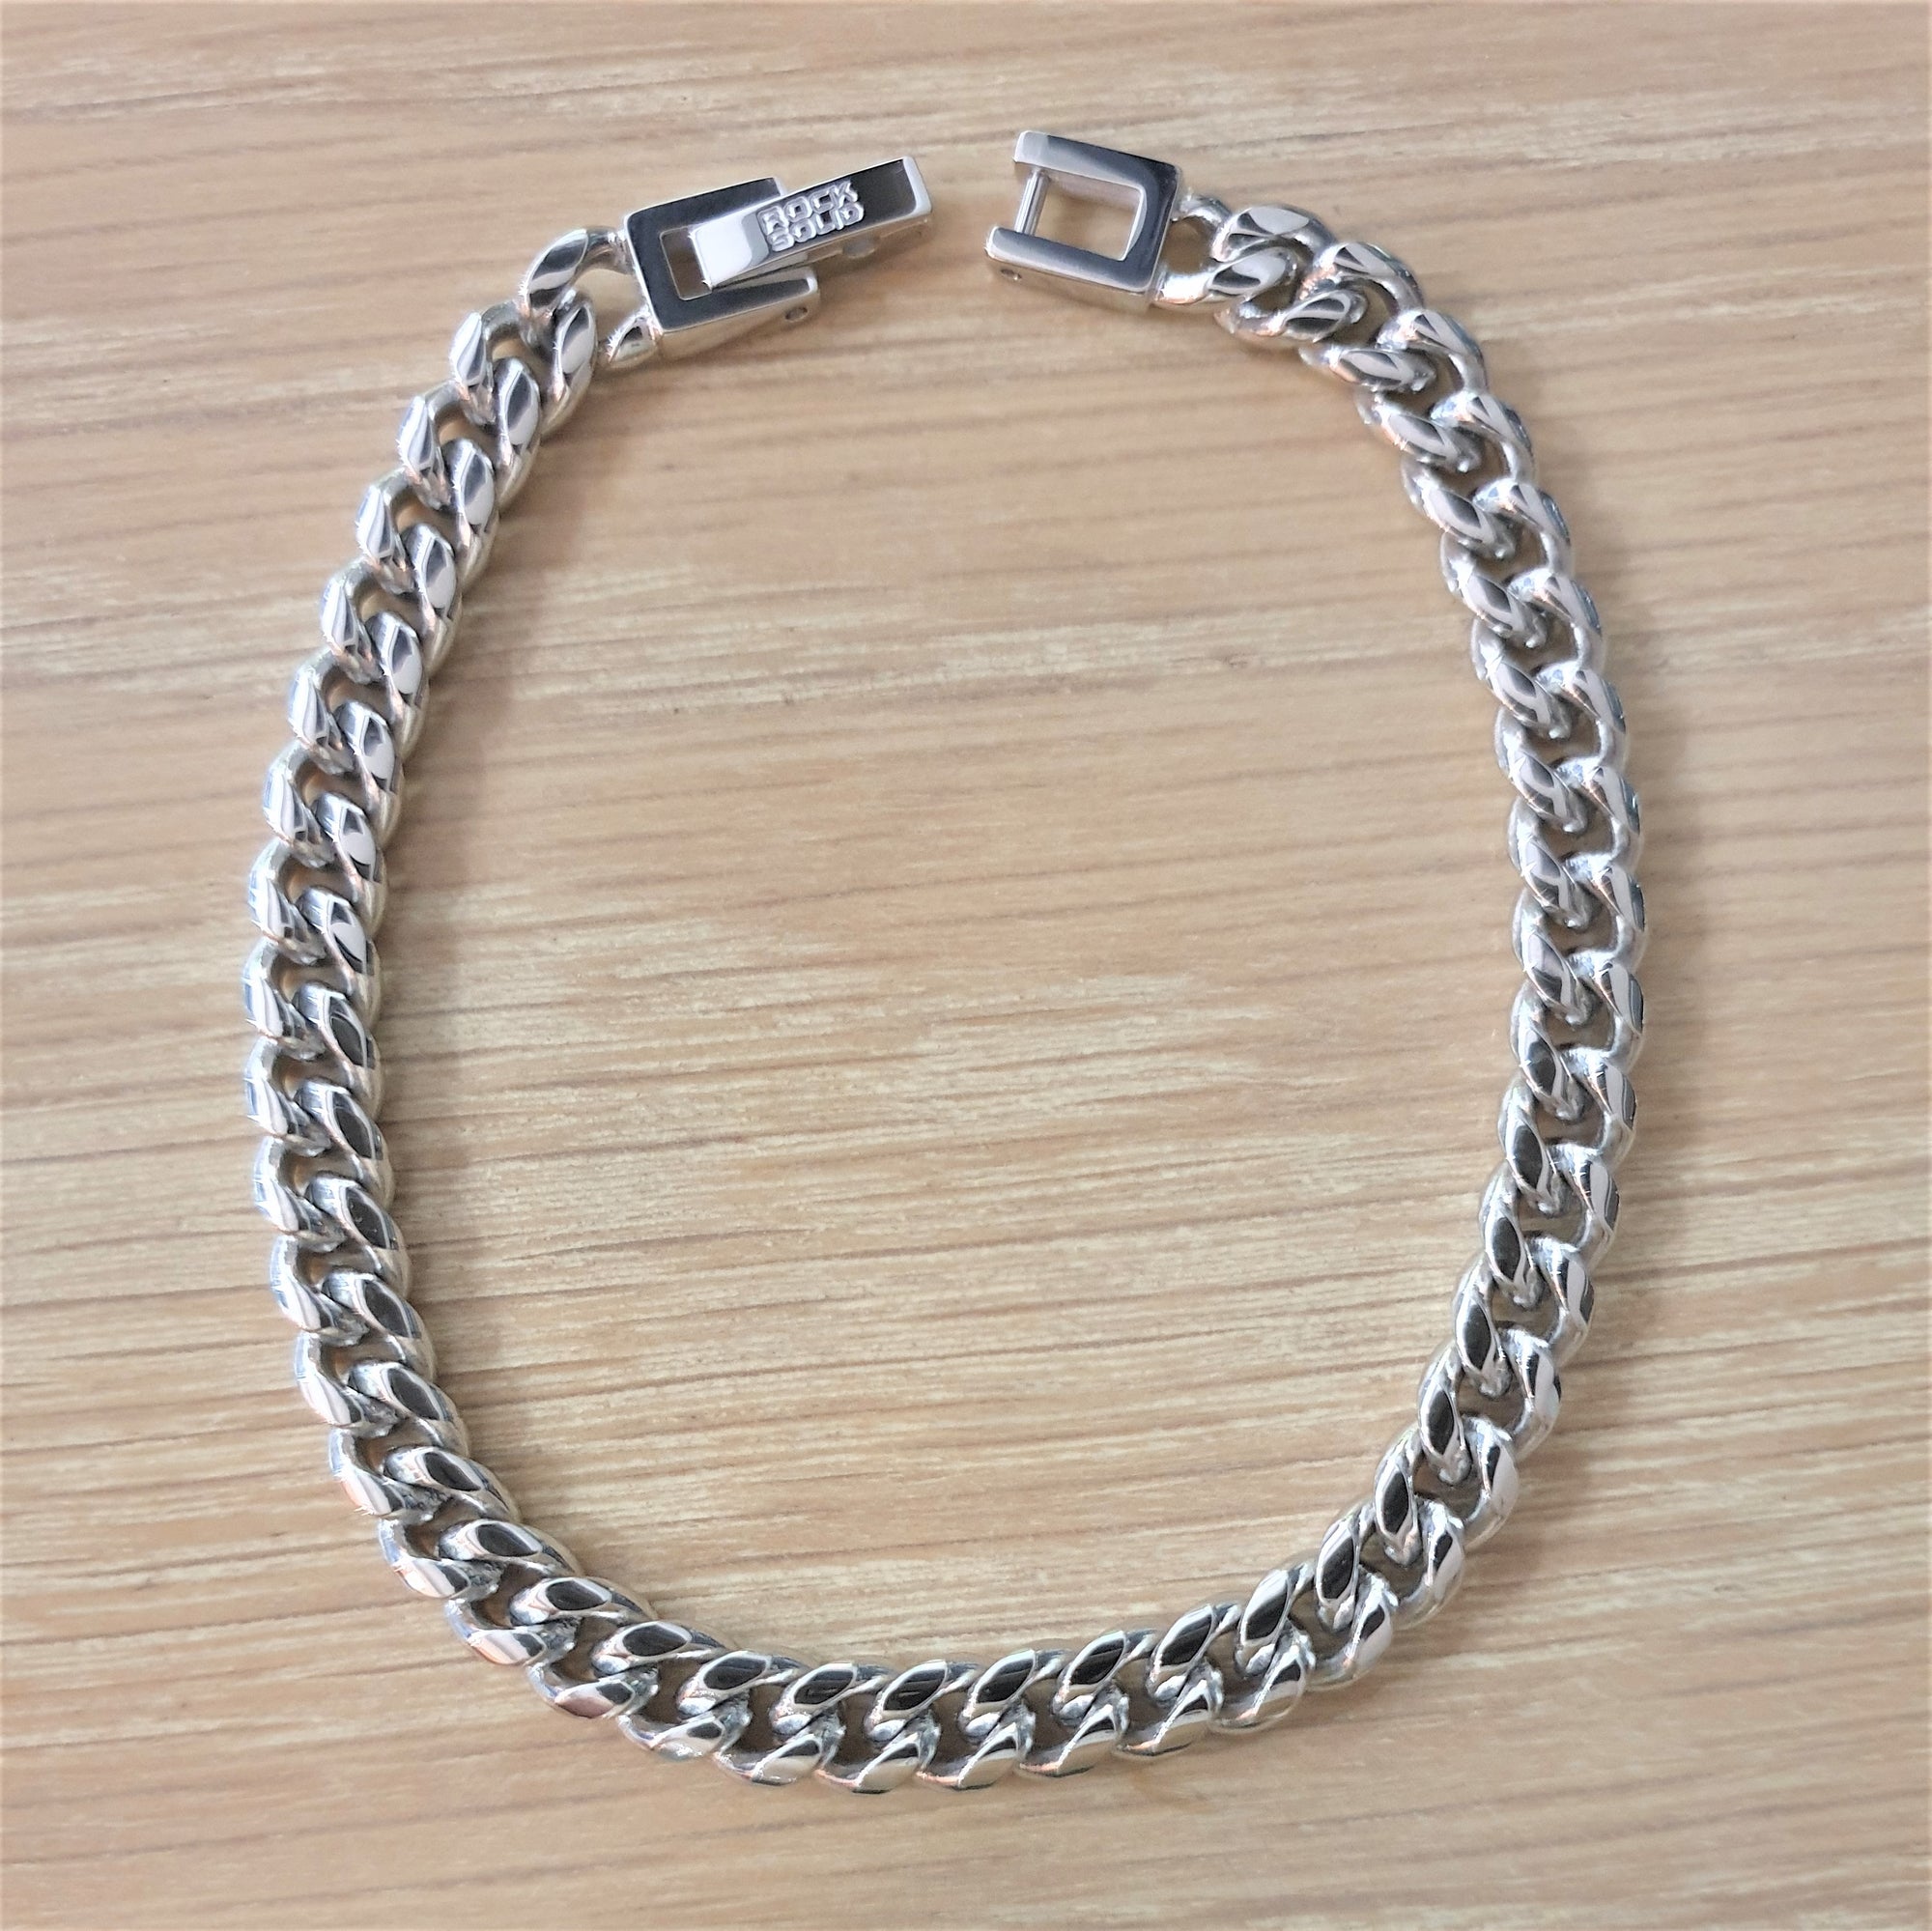 The Rock SOLID Chain 6mm Bracelet